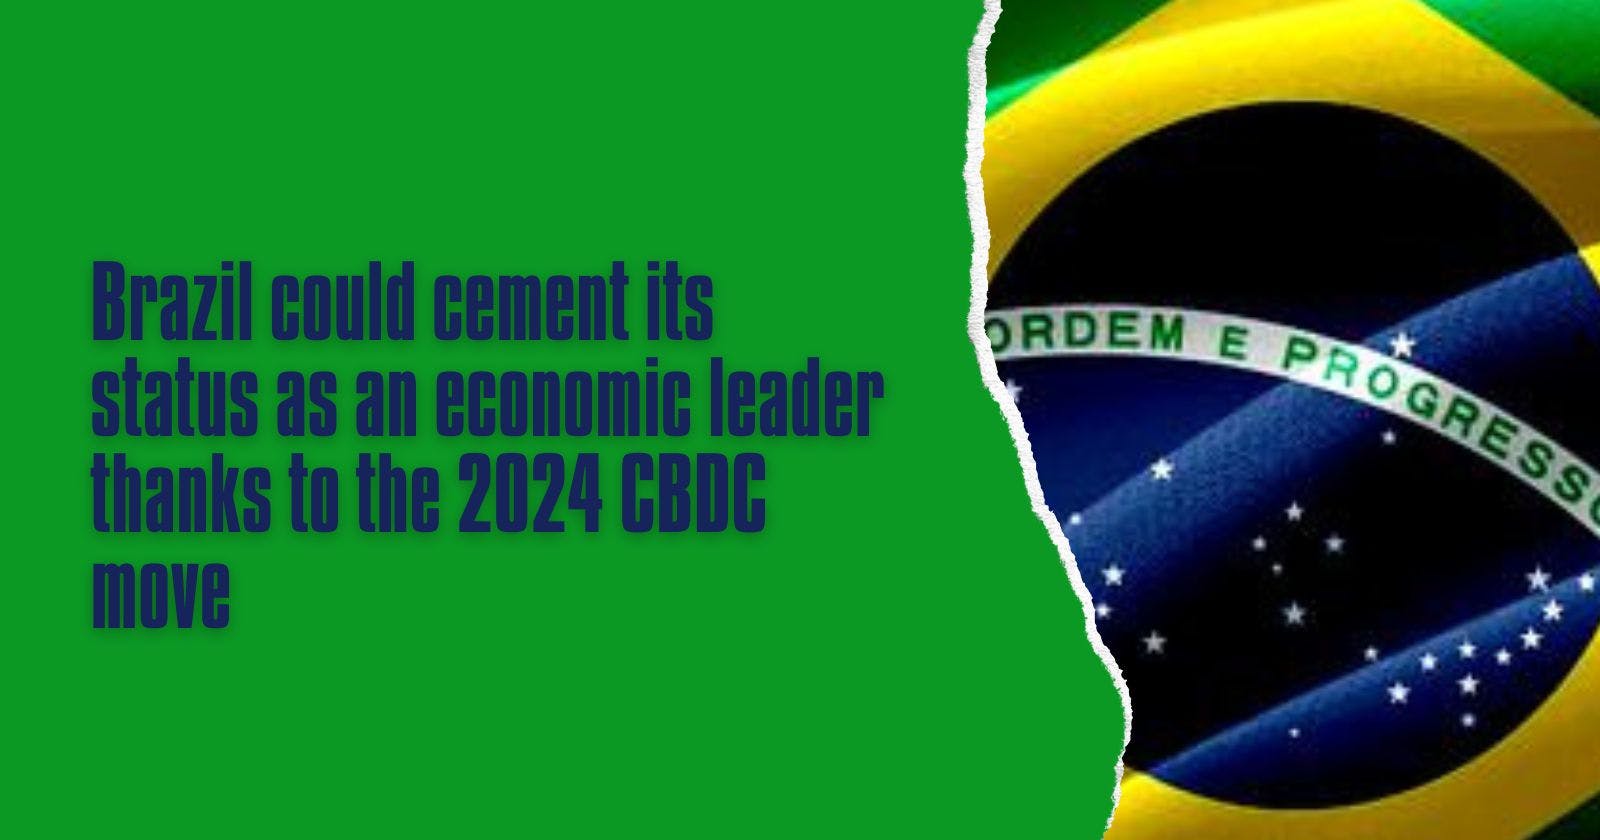 A movement to make Brazil an economic leader in South America.